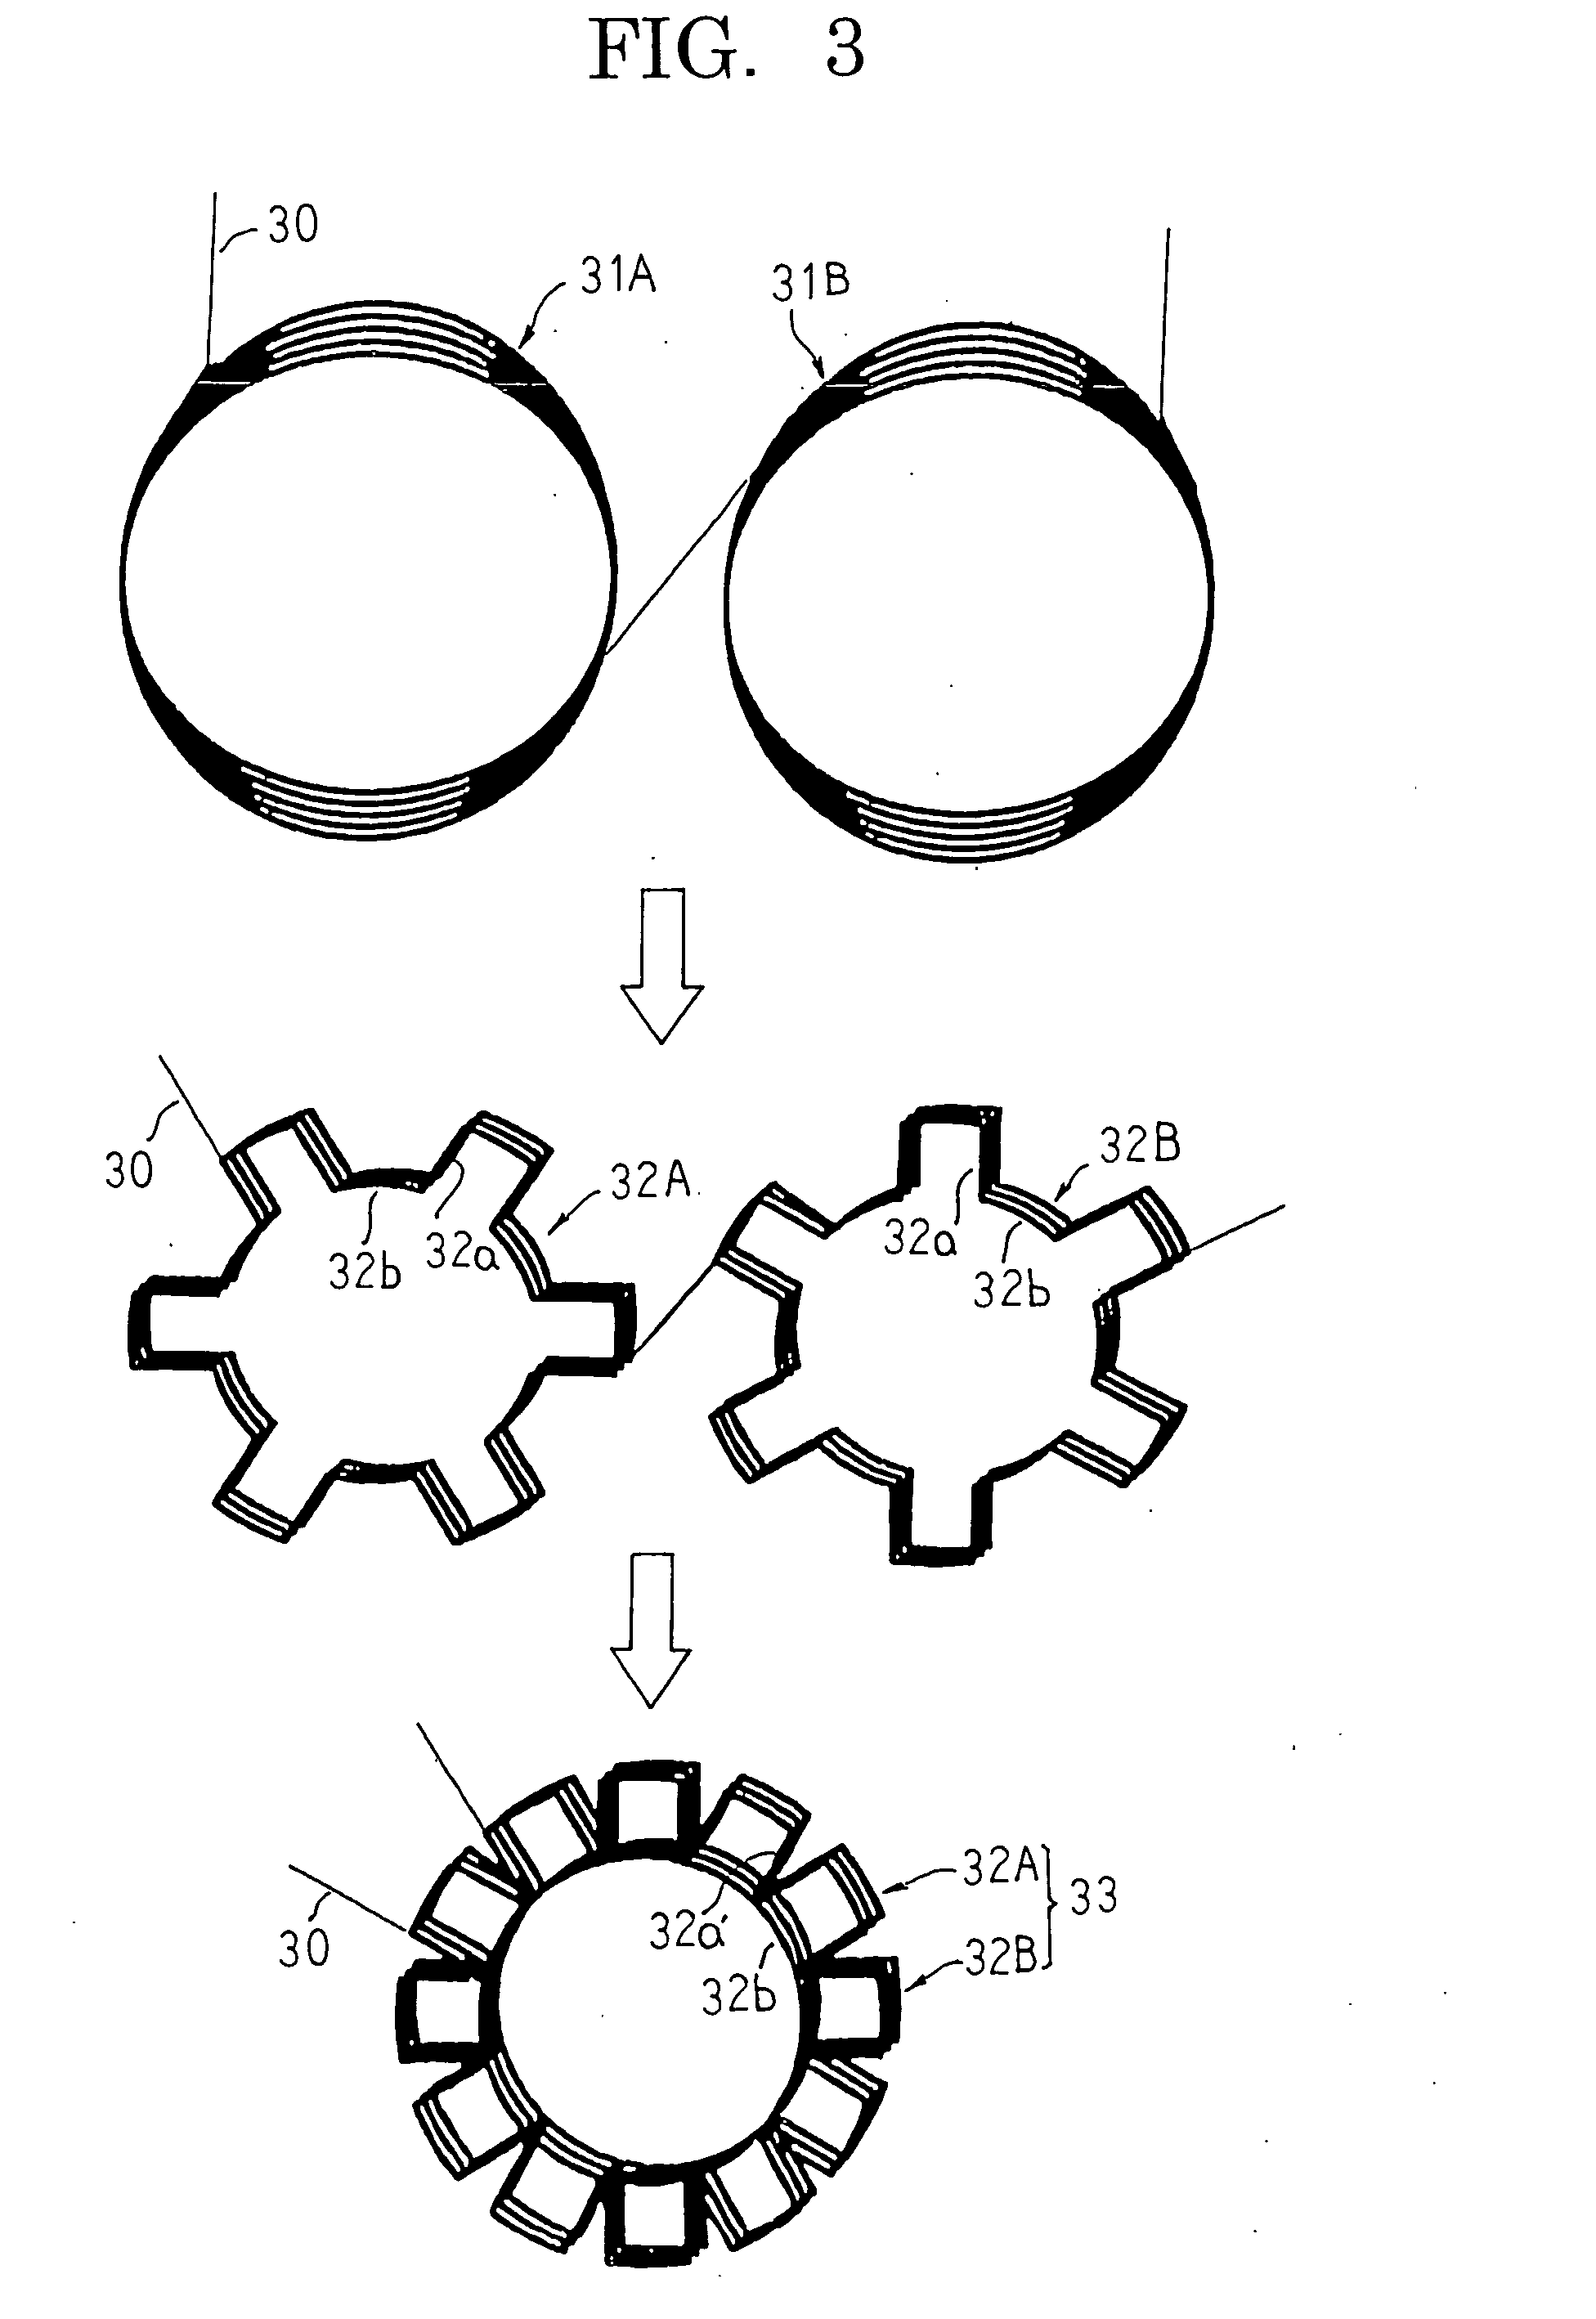 Stator of dynamoelectric machine and method for manufacturing stator winding